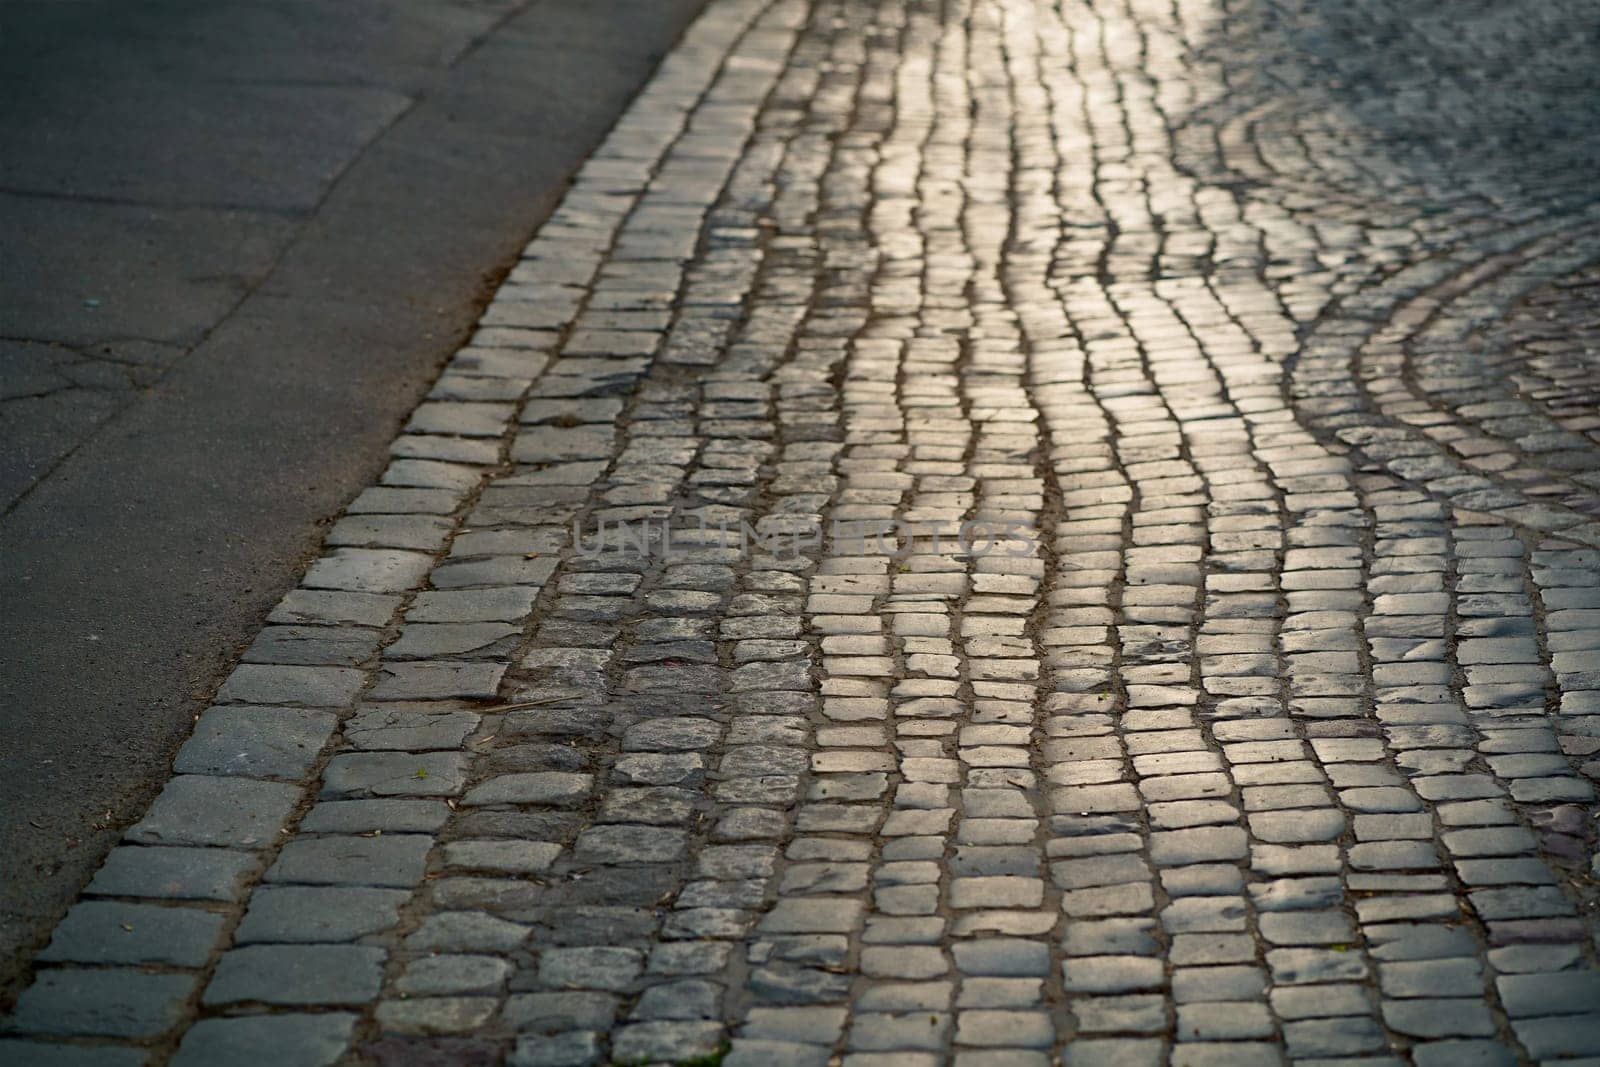 Stone pavement in perspective. Artistic texture and background. Element of the old street of the city of Lviv in Ukraine. Outdoor street design of the territory of natural stone.